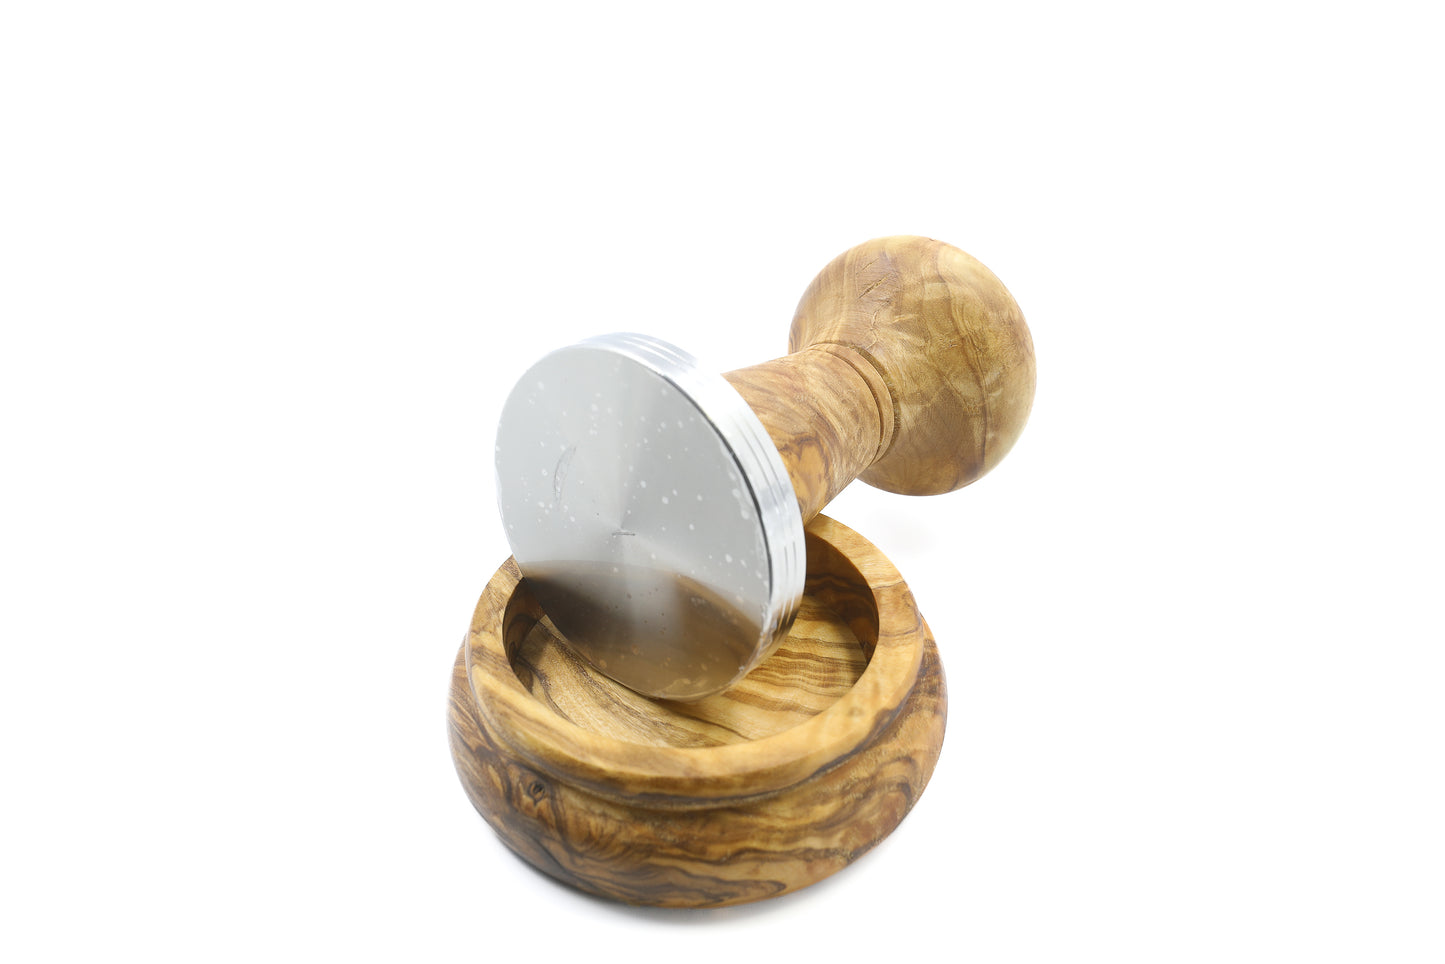 Olive wood and stainless steel coffee tamper with a holder, a beautiful addition to your coffee setup